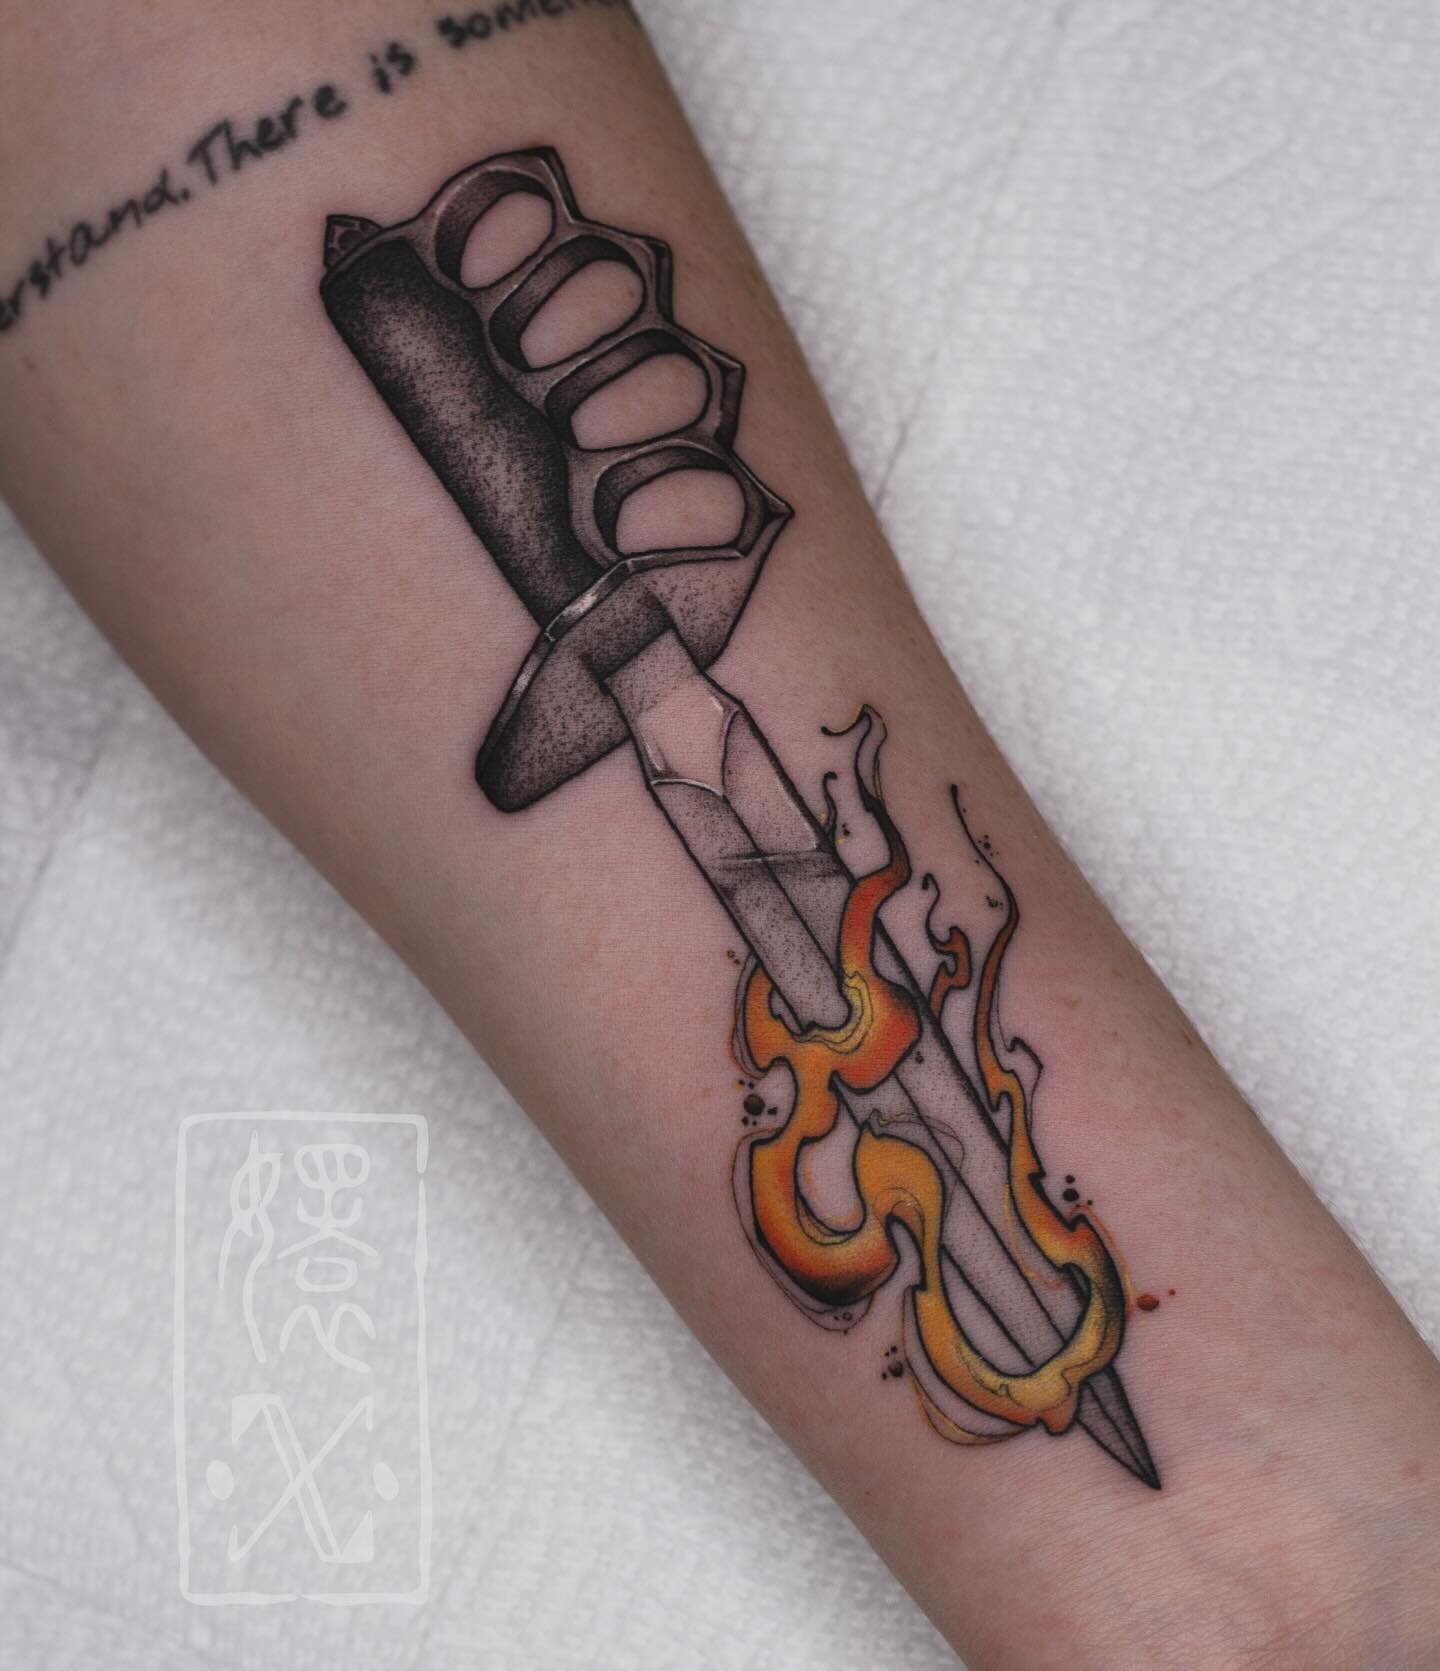 My interpretation of Lila&rsquo;s knife from Shades of Magic series by @veschwab 🔪 🔥 thank you so so much for letting me create this in my style, I would absolutely LOVE more projects like this ((Booktok where you at))

Done @cakeisalietattoo 🍰 

